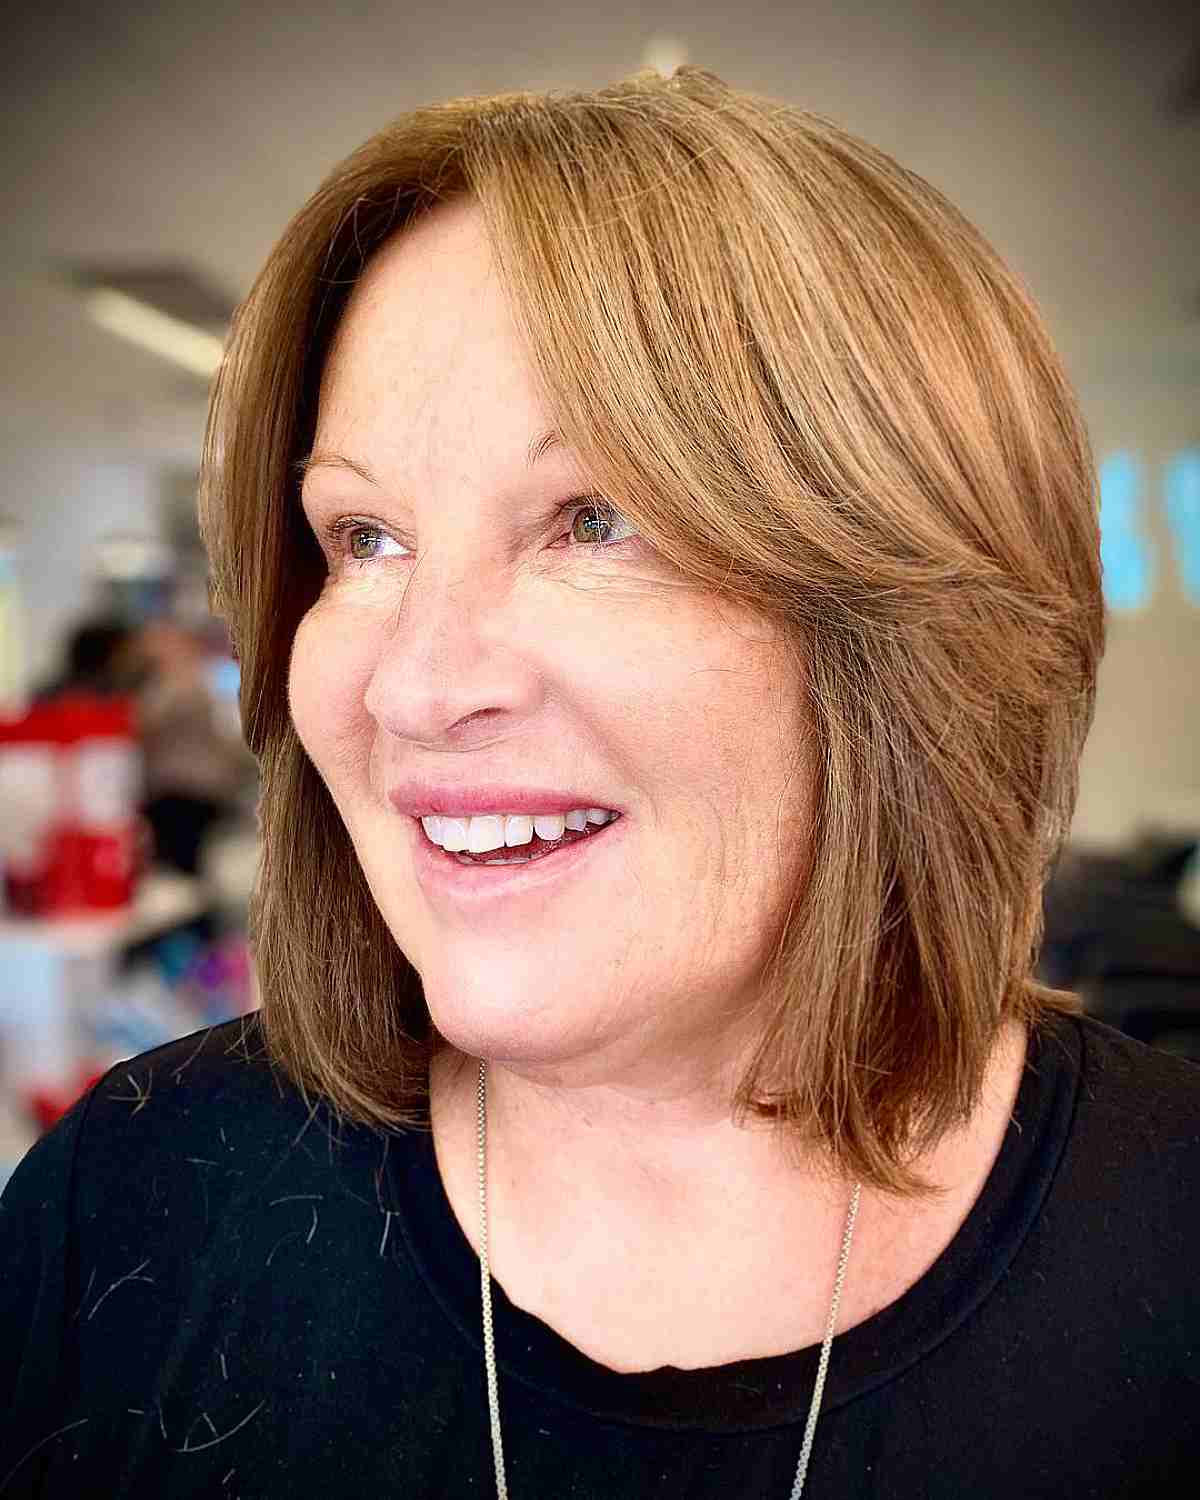 Lob Cut with Middle Part Bangs and Soft Layers for Women in Their 60s